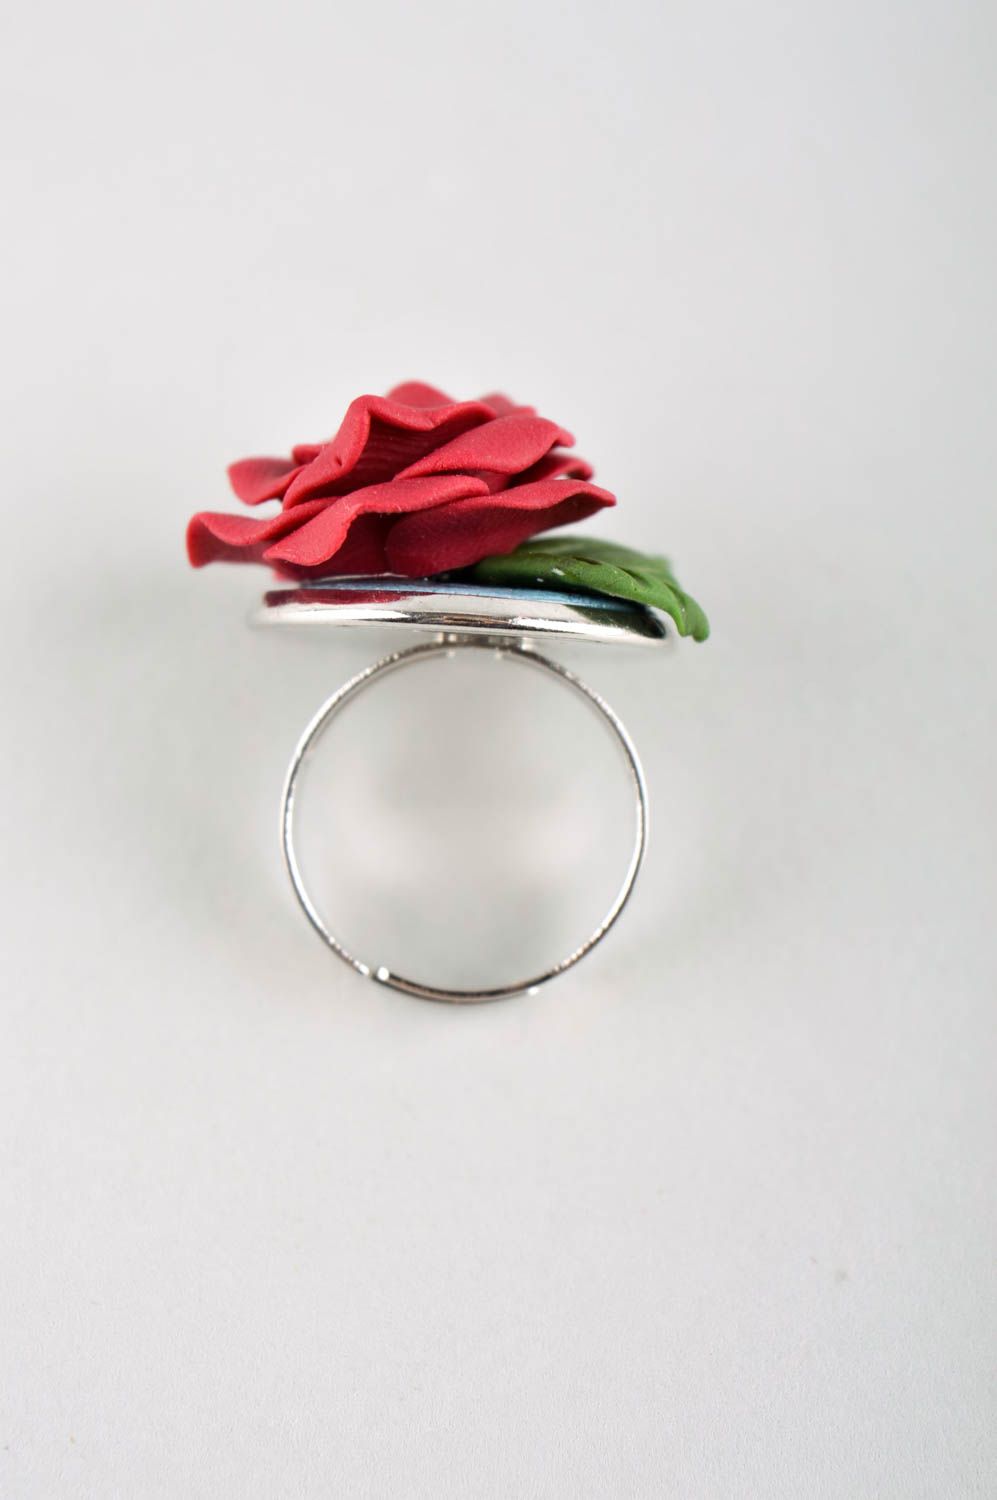 Handmade cute flower ring jewelry made of clay designer adjustable ring photo 5